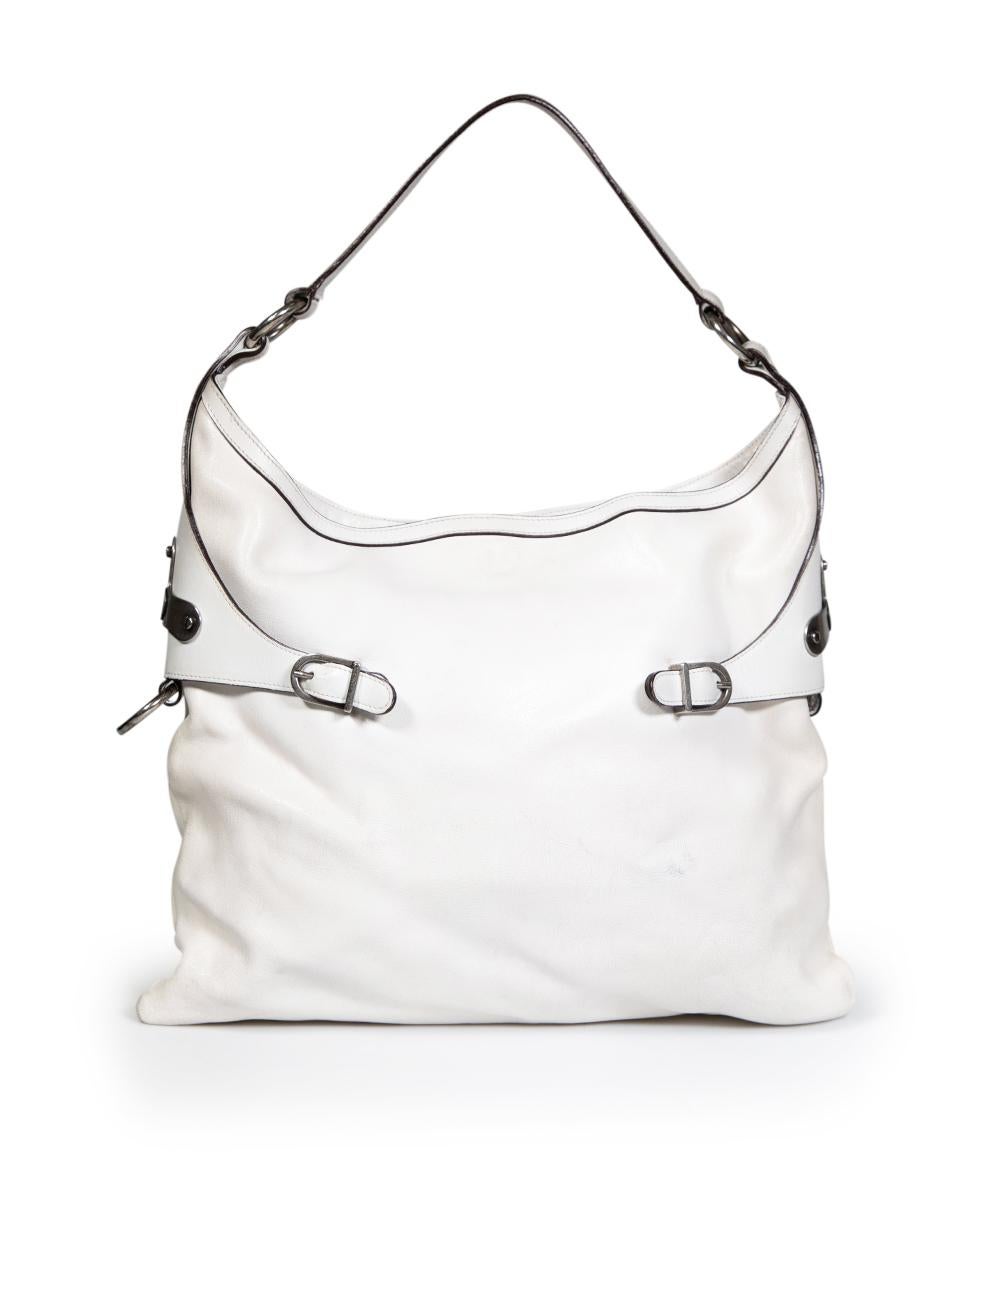 Versace White Leather Buckle Detail Shoulder Bag In Good Condition For Sale In London, GB